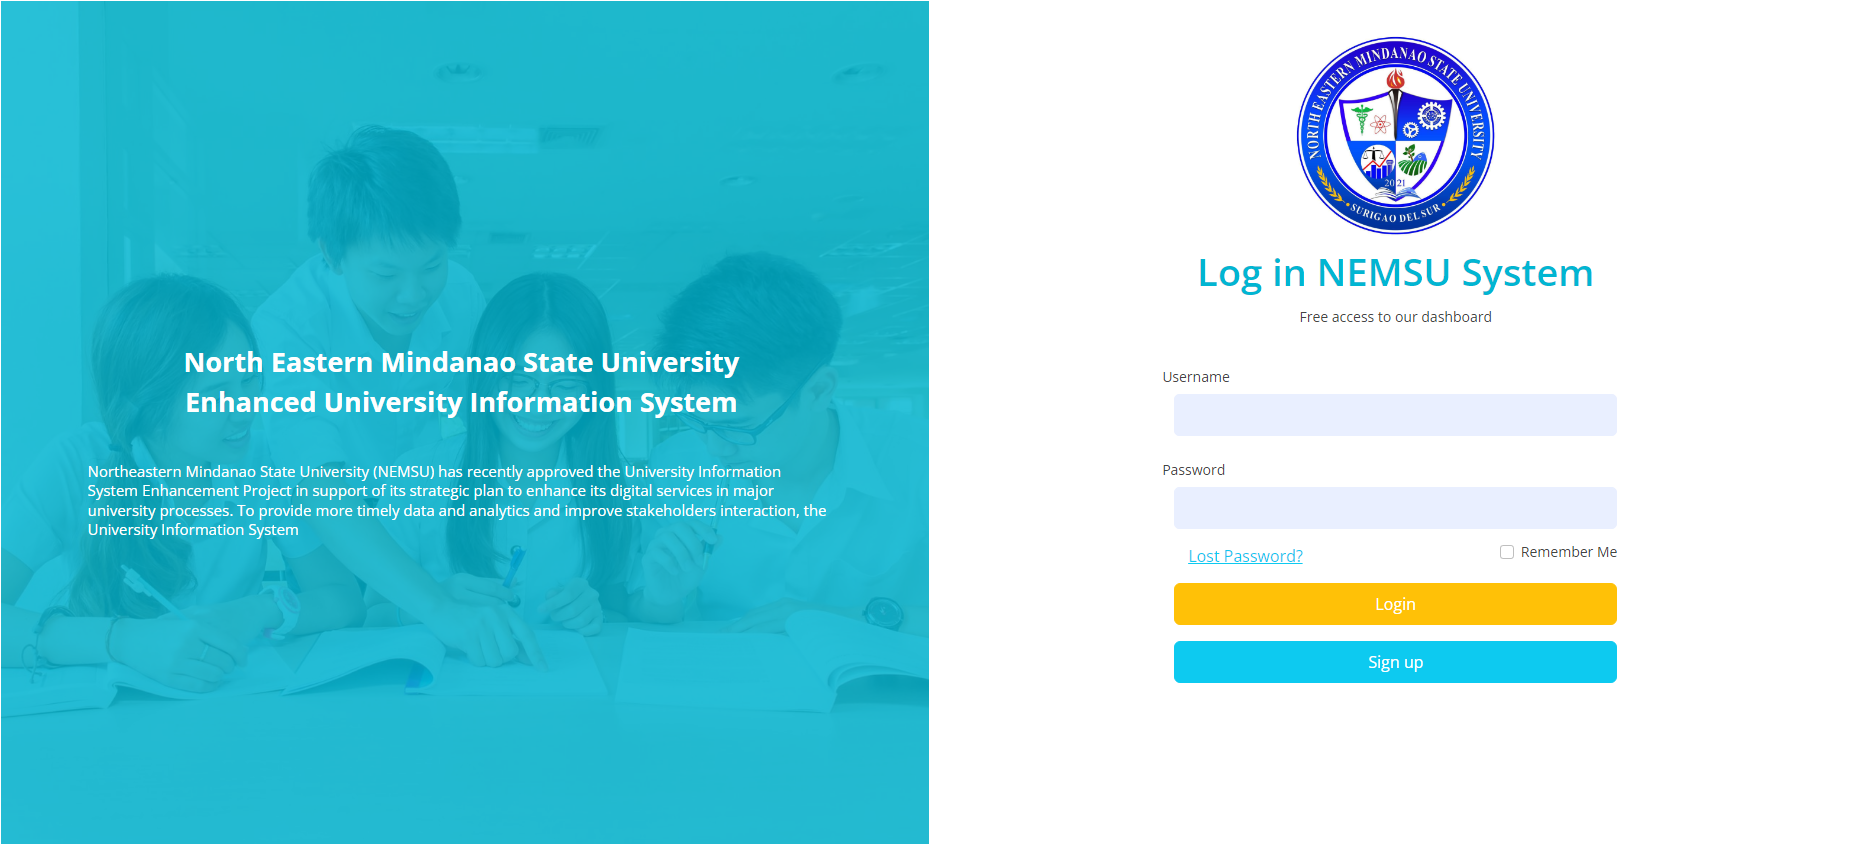 Northeastern Mindanao State University (NEMSU) has recently approved the University Information System Enhancement Project in support of its strategic plan to enhance its digital services in major university processes. To provide more timely data and analytics and improve stakeholders interaction, the University Information System